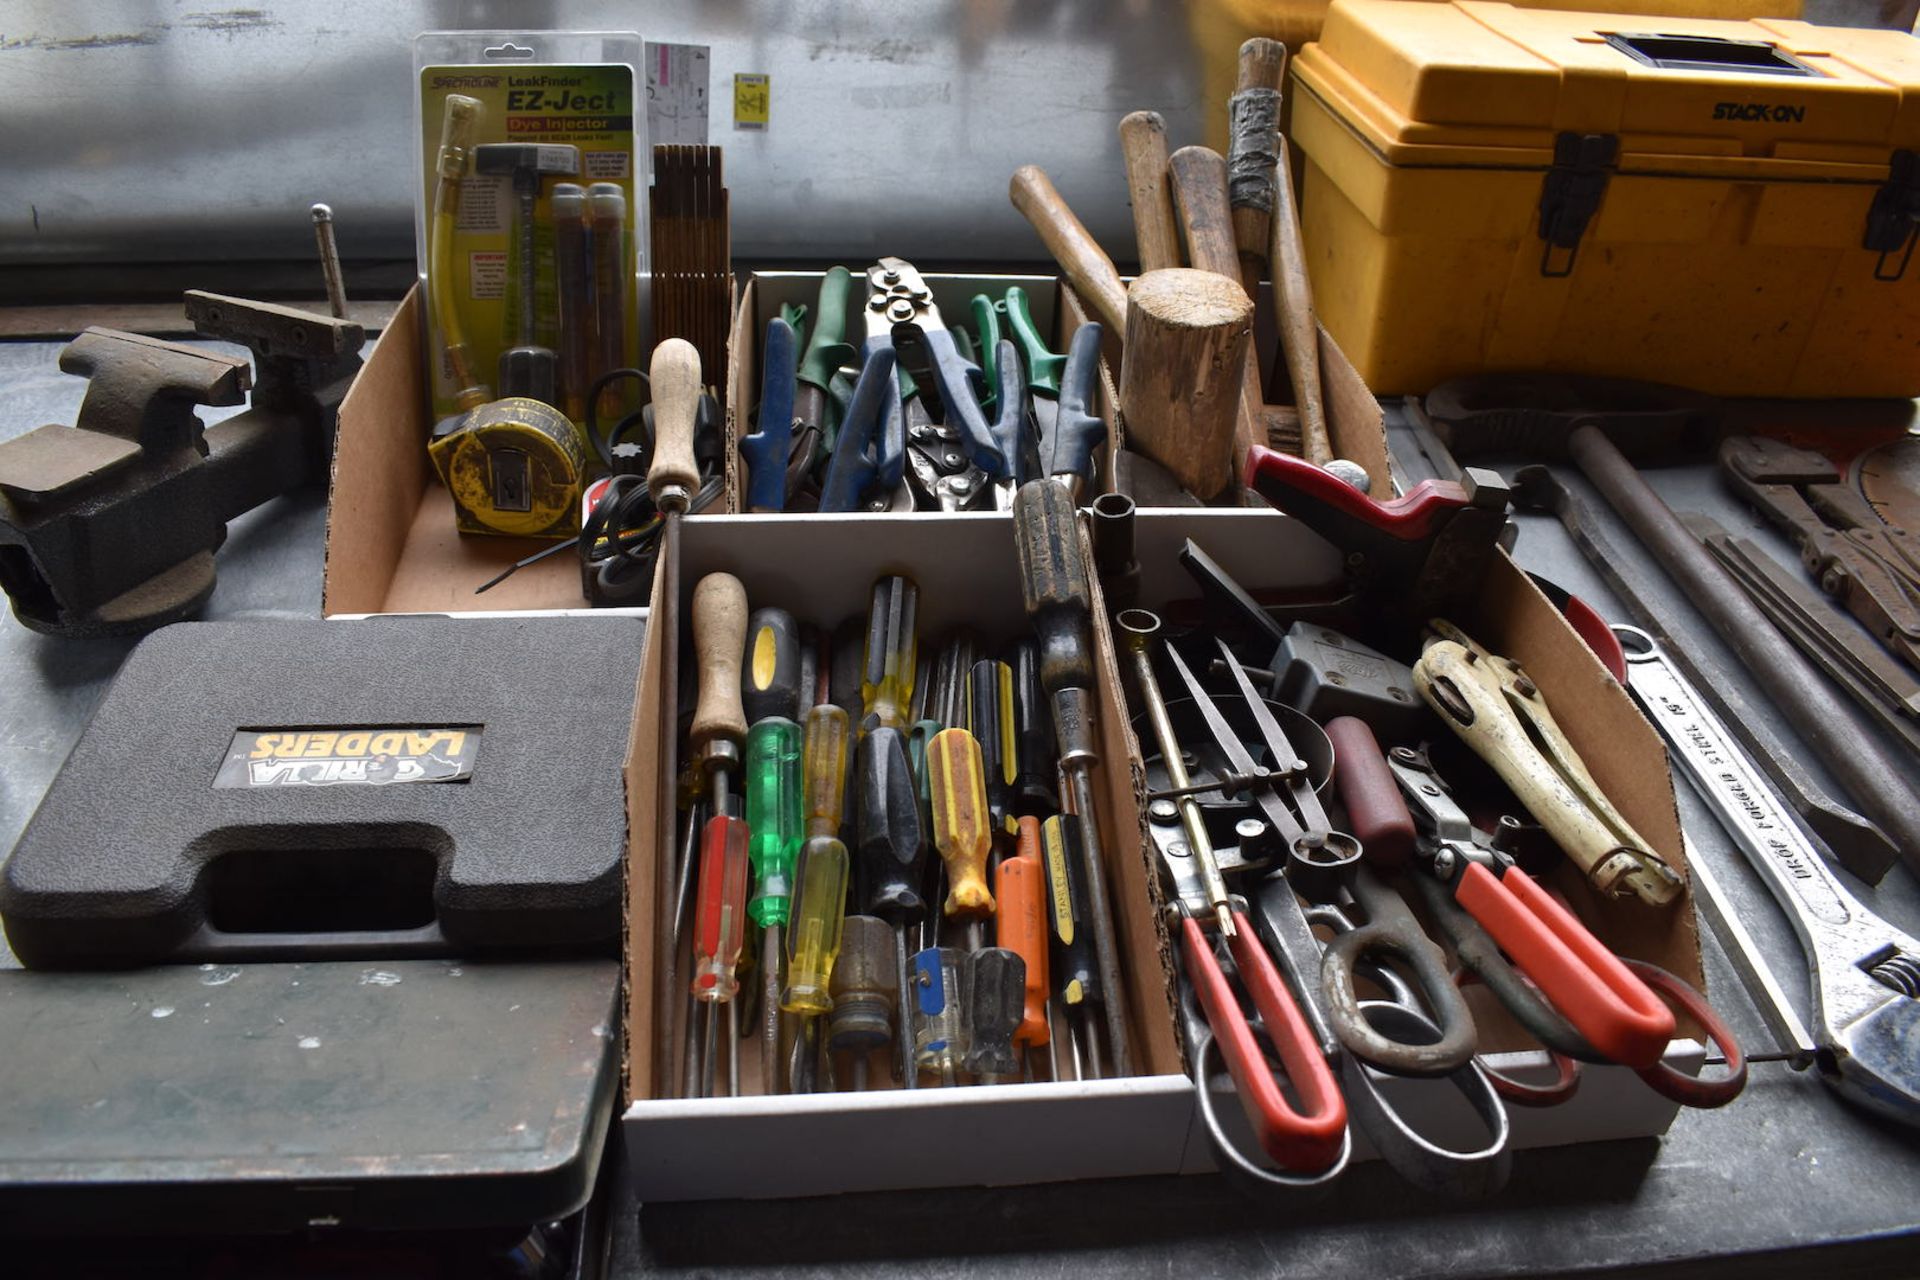 Lot: Assorted Hand Tools including C-Clamp, Conduit Benders, Metal Snips, Screw Drivers, Hammers, - Image 4 of 4